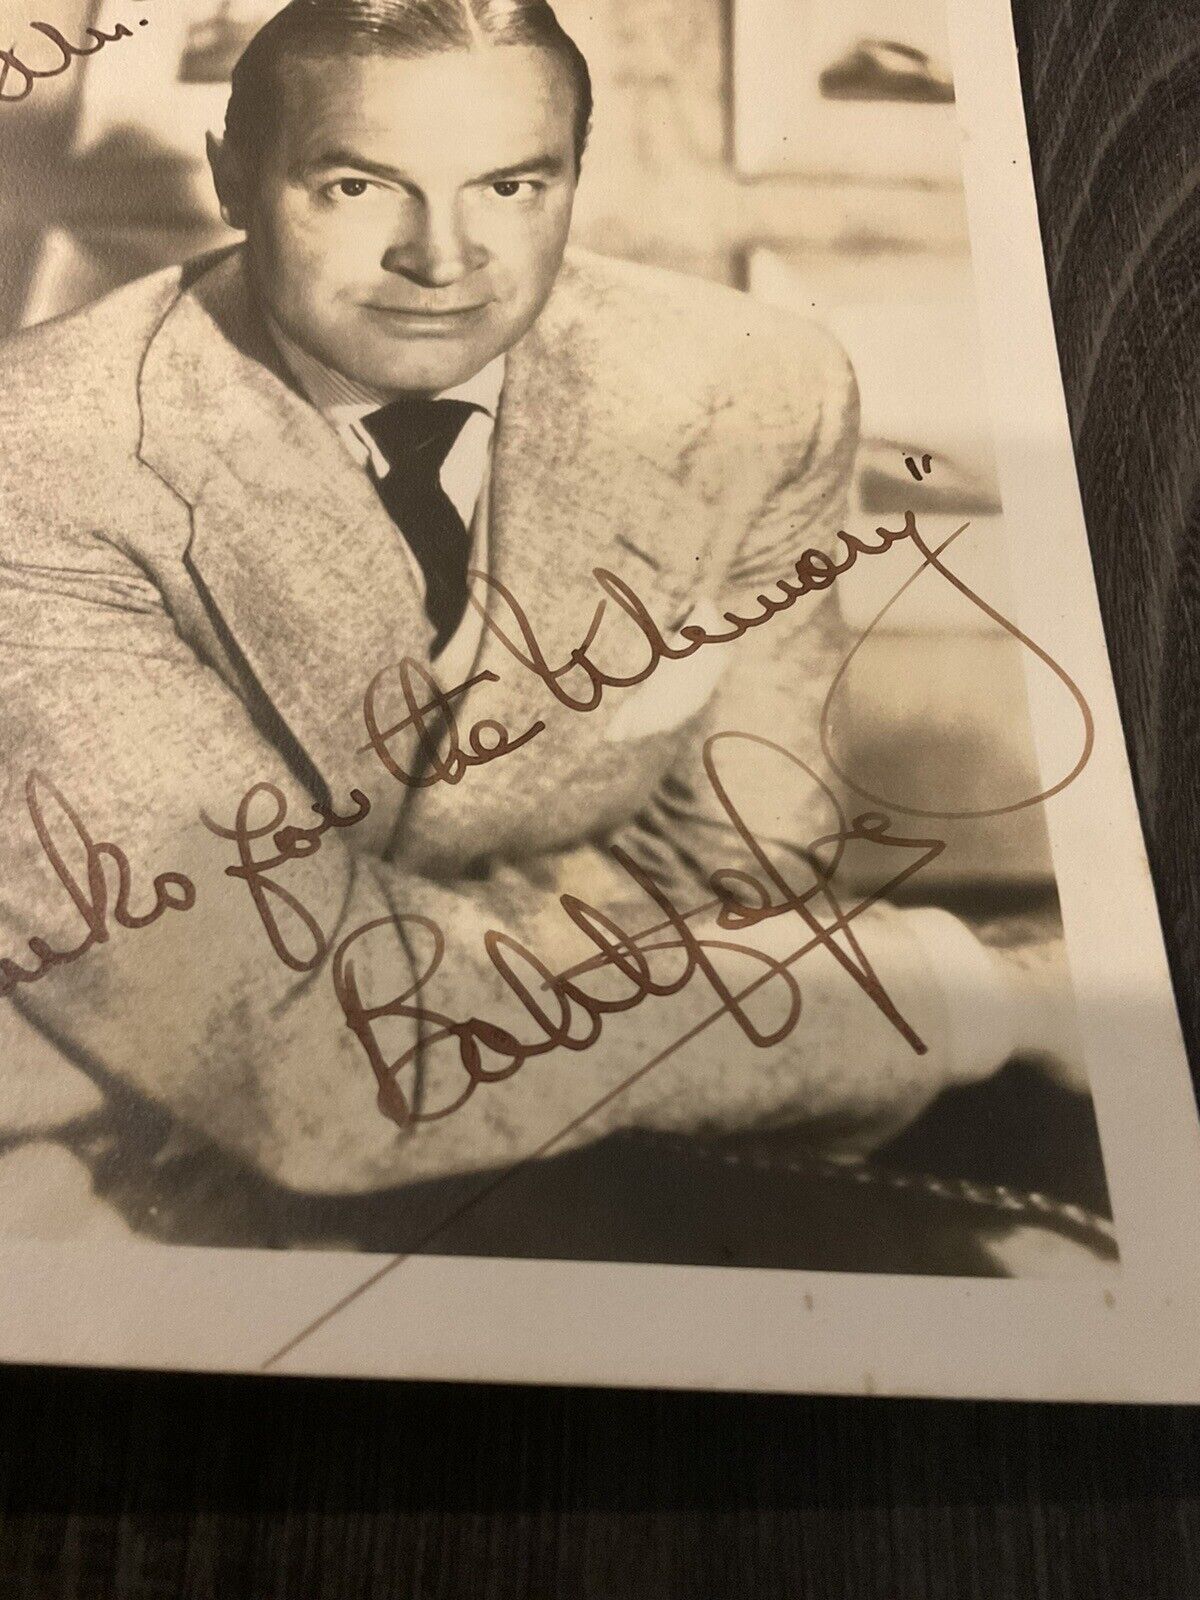 BOB HOPE hand Signed ✍️ 5x7 Original Photo/ Absolutely A Perfect INK SIGNATURE 